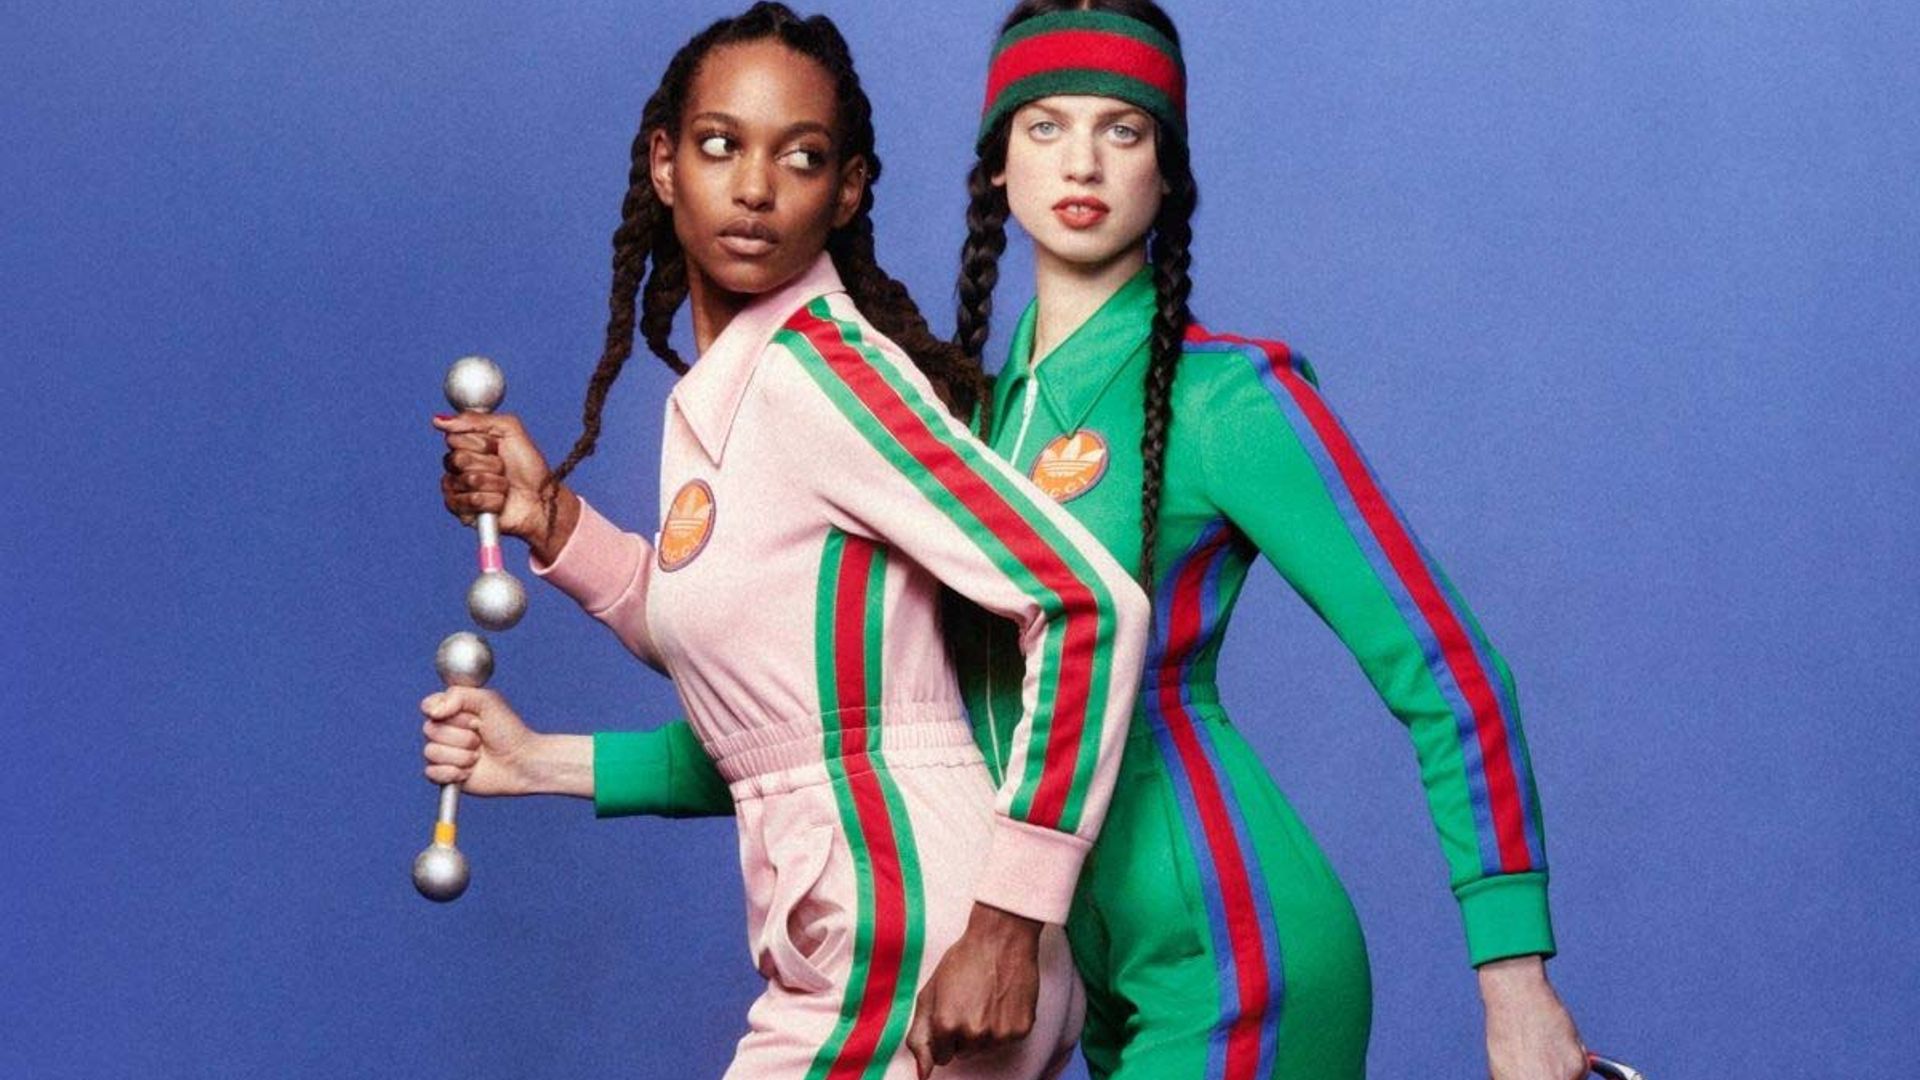 You may not have not noticed this about the Gucci x Adidas collaboration